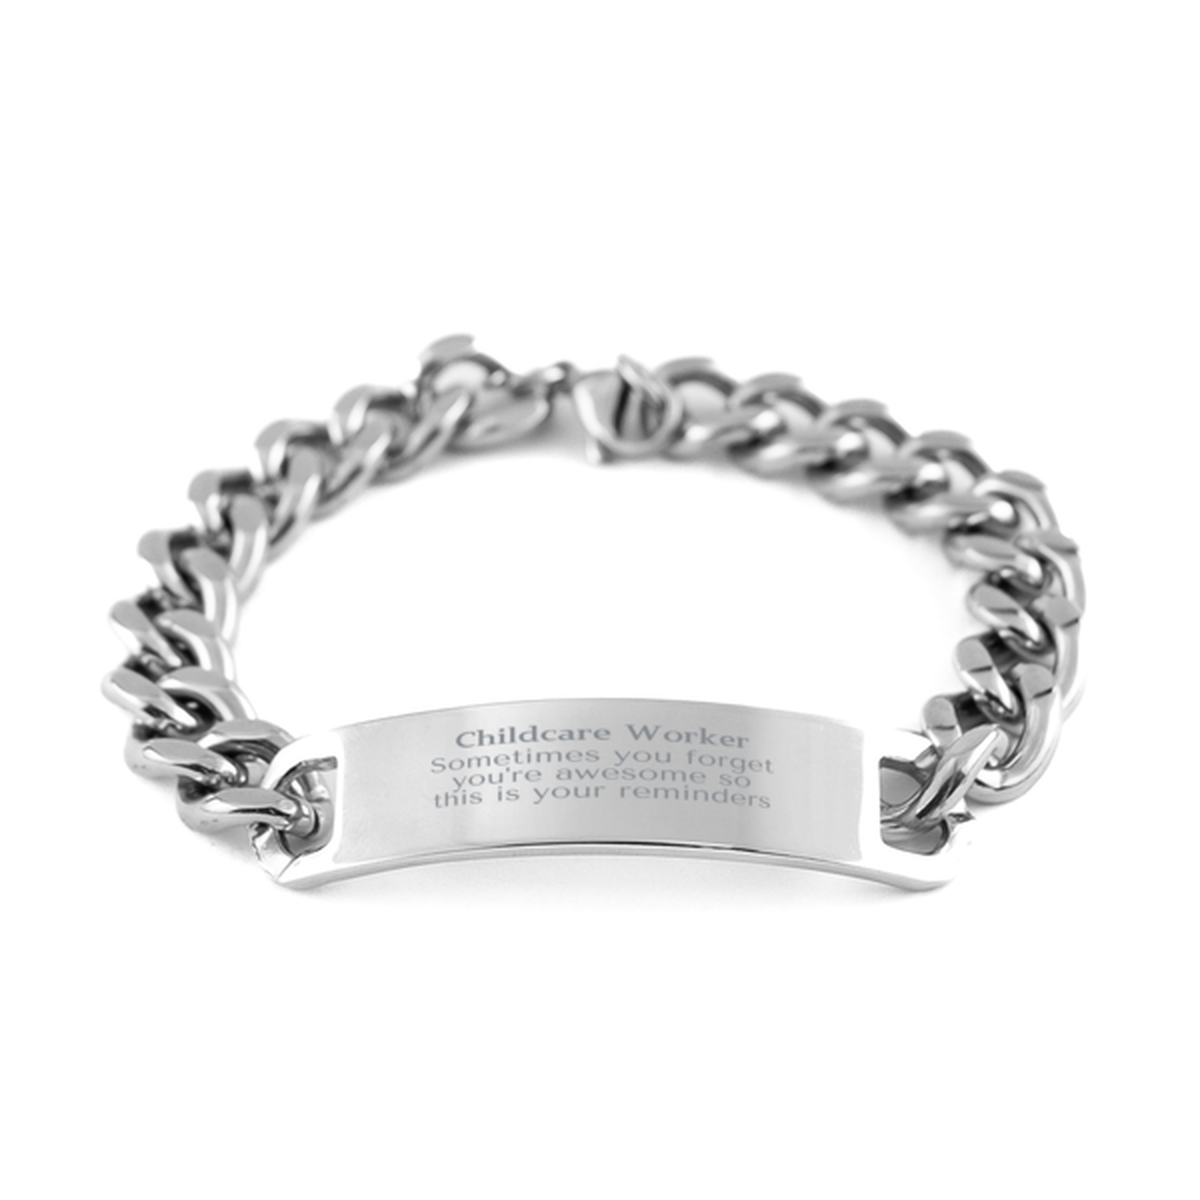 Sentimental Childcare Worker Cuban Chain Stainless Steel Bracelet, Childcare Worker Sometimes you forget you're awesome so this is your reminders, Graduation Christmas Birthday Gifts for Childcare Worker, Men, Women, Coworkers